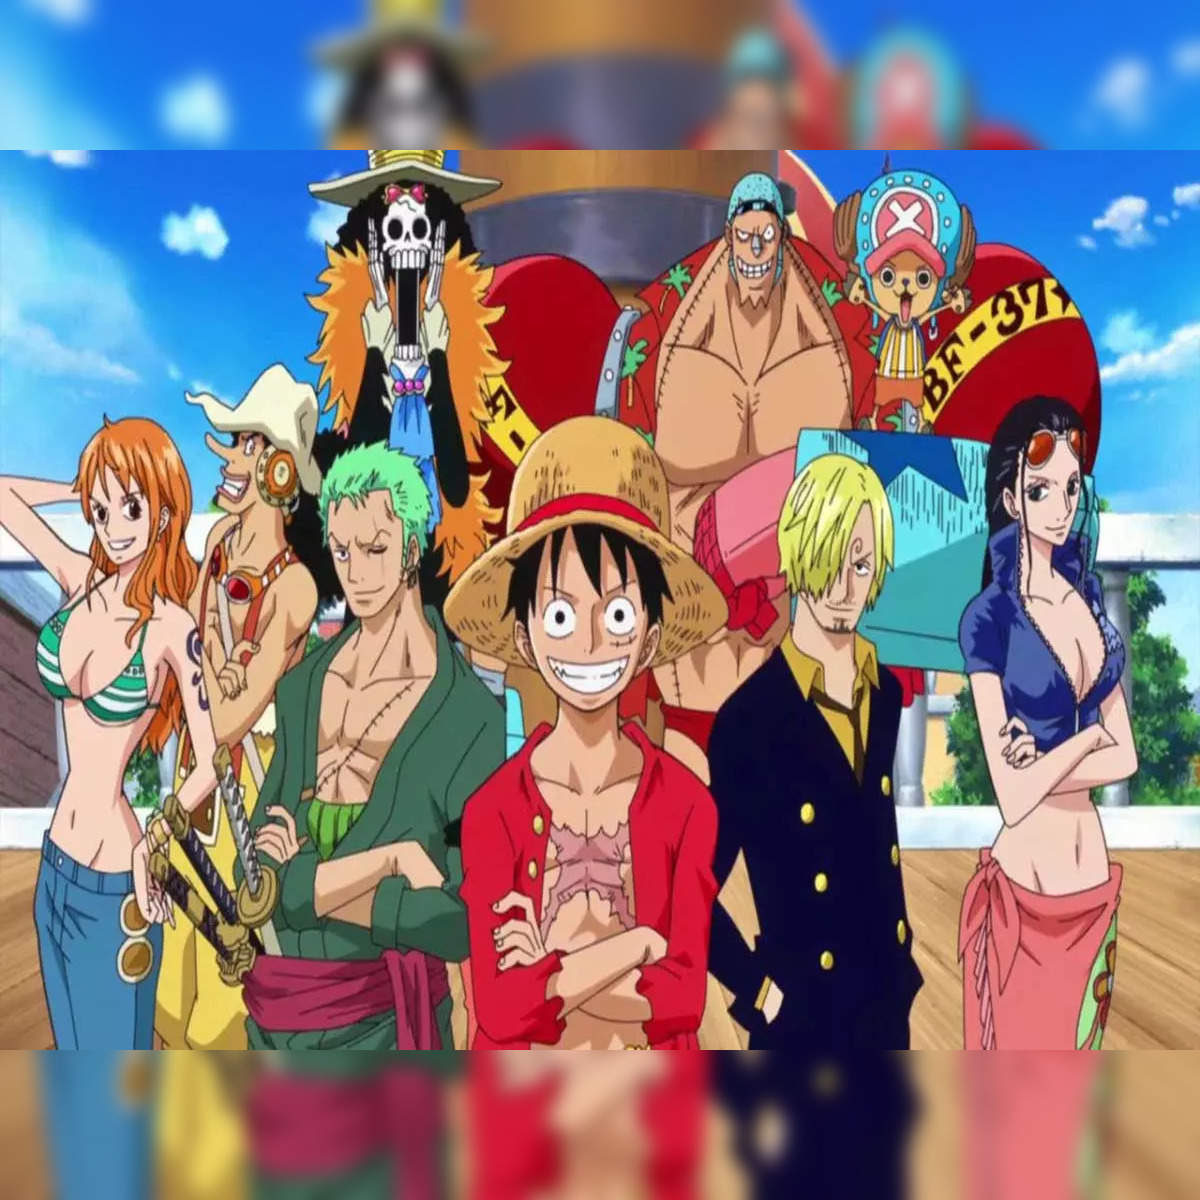 15 Anime Series That Adults Will Enjoy (But Kids Will Find Boring)